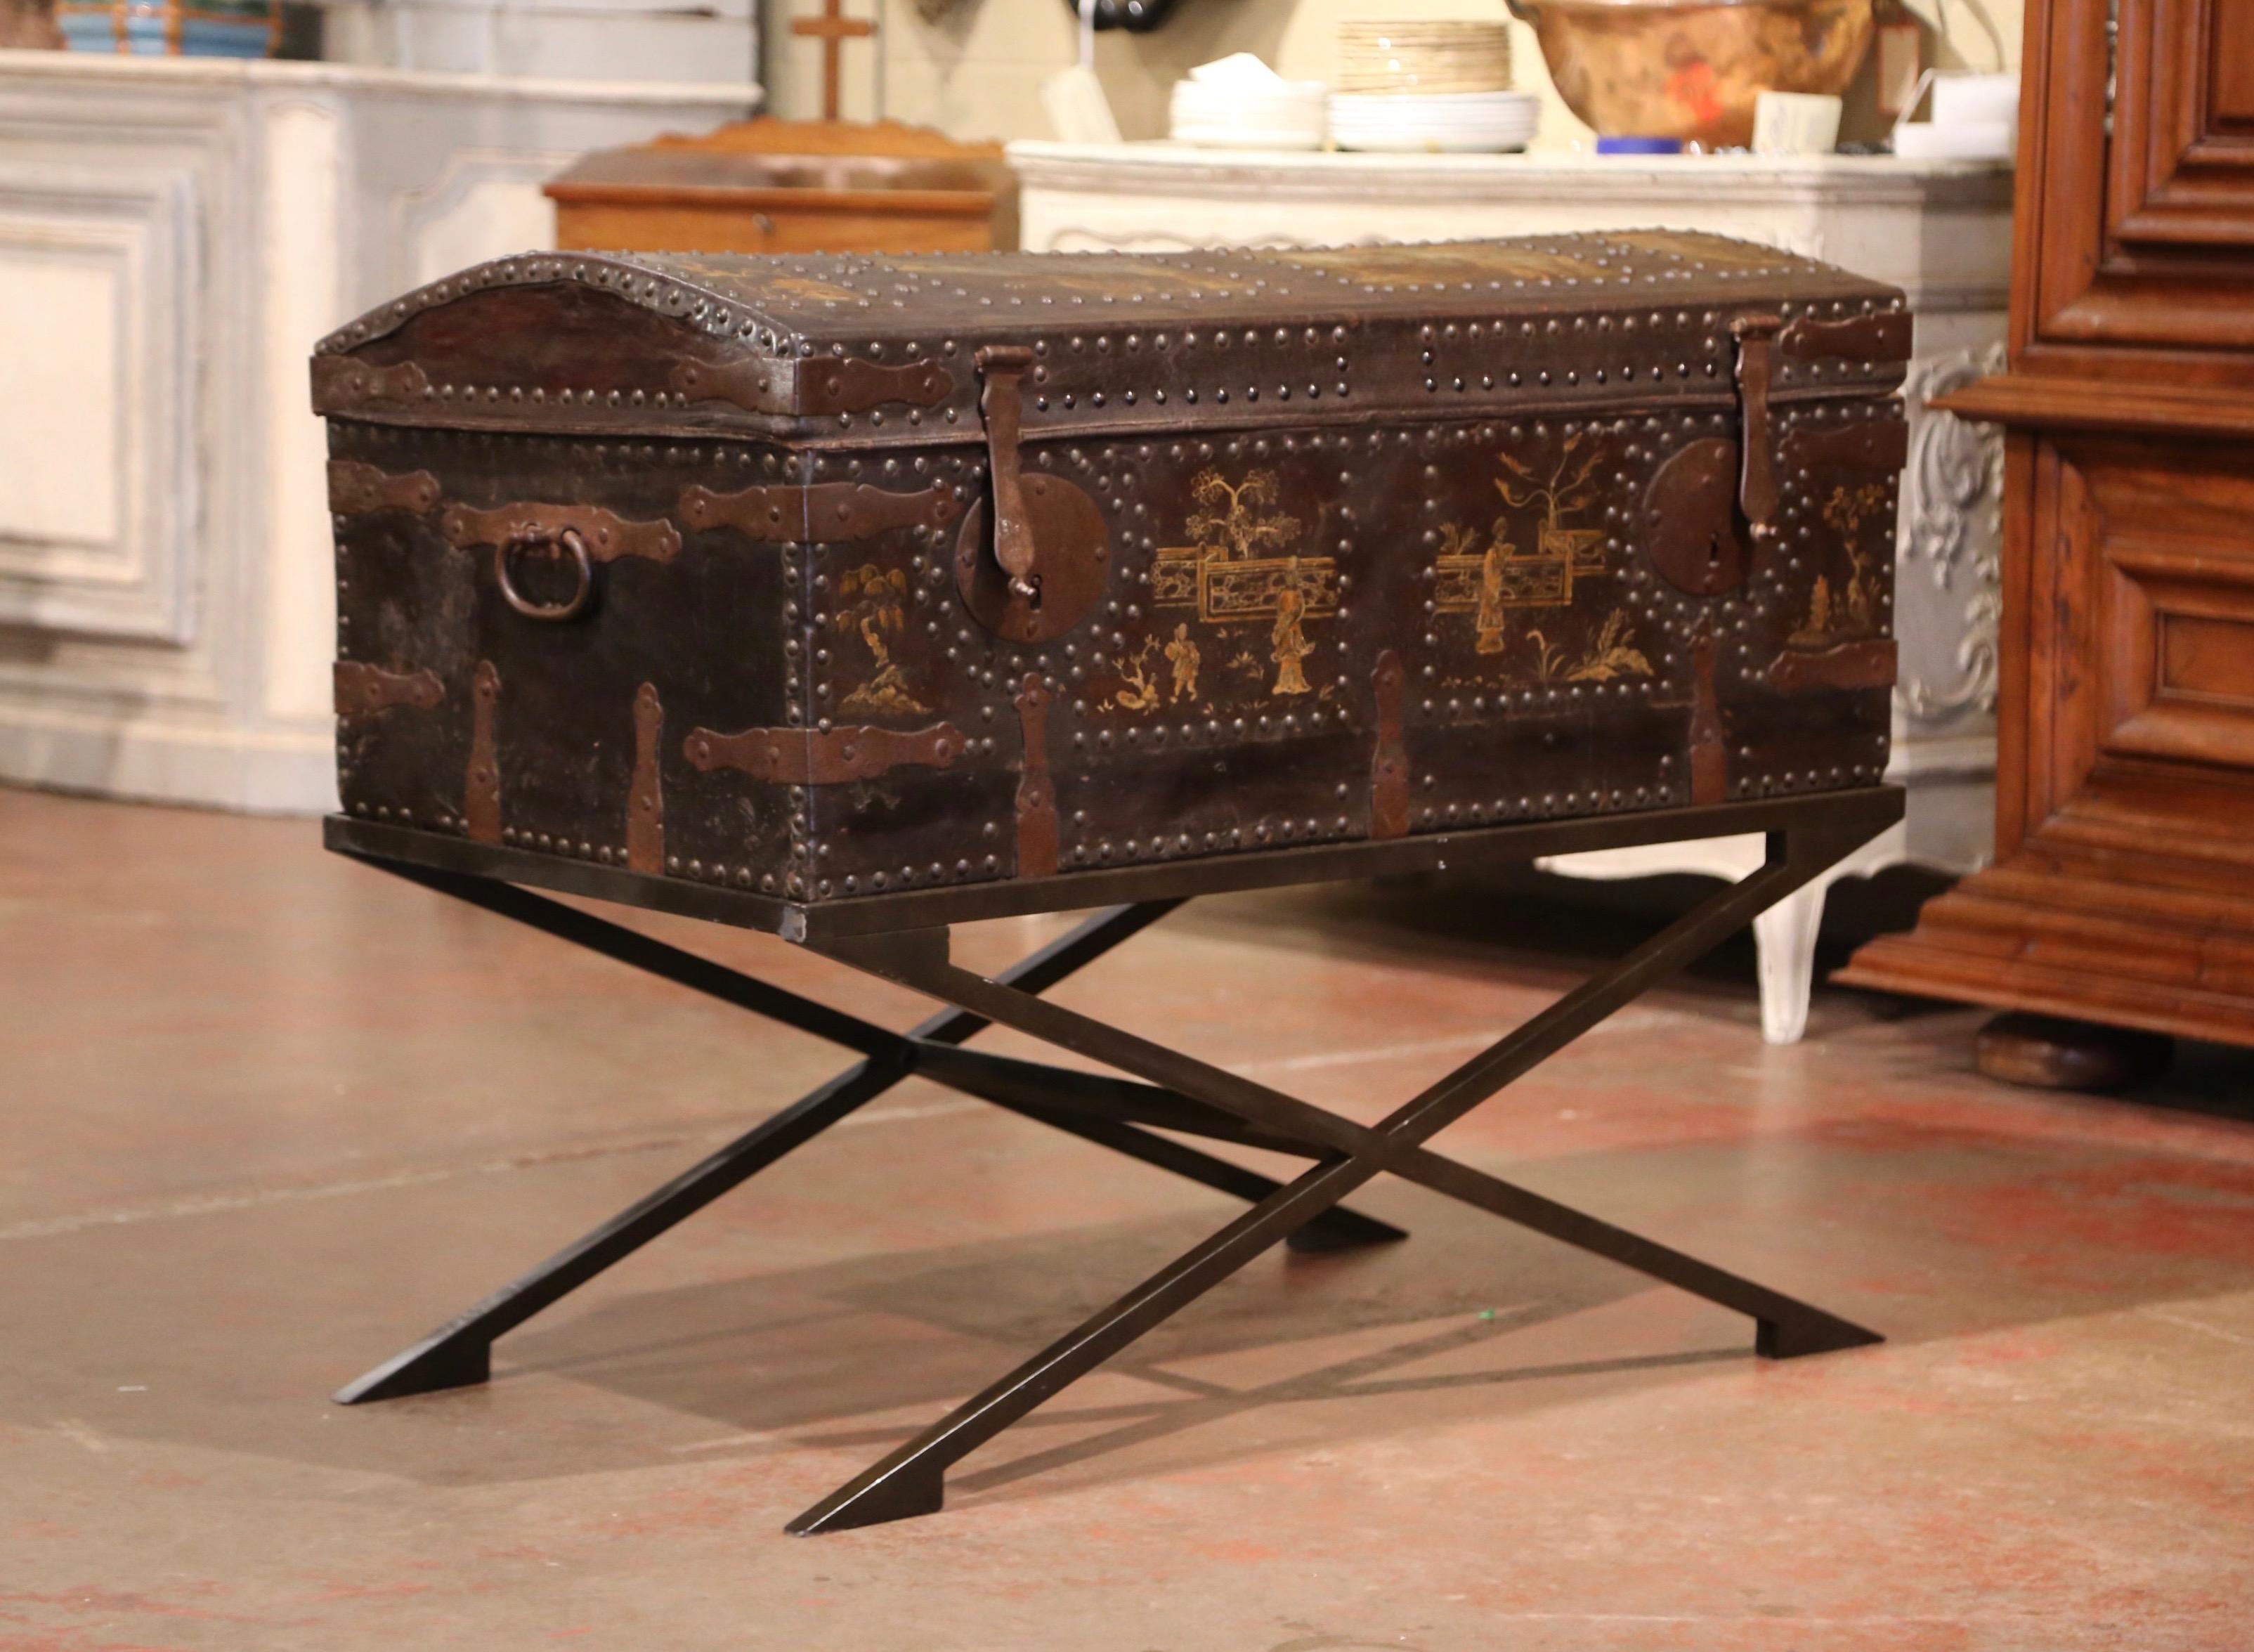 19th Century French Gothic Leather Trunk in Iron Base with Chinoiserie Decor 1